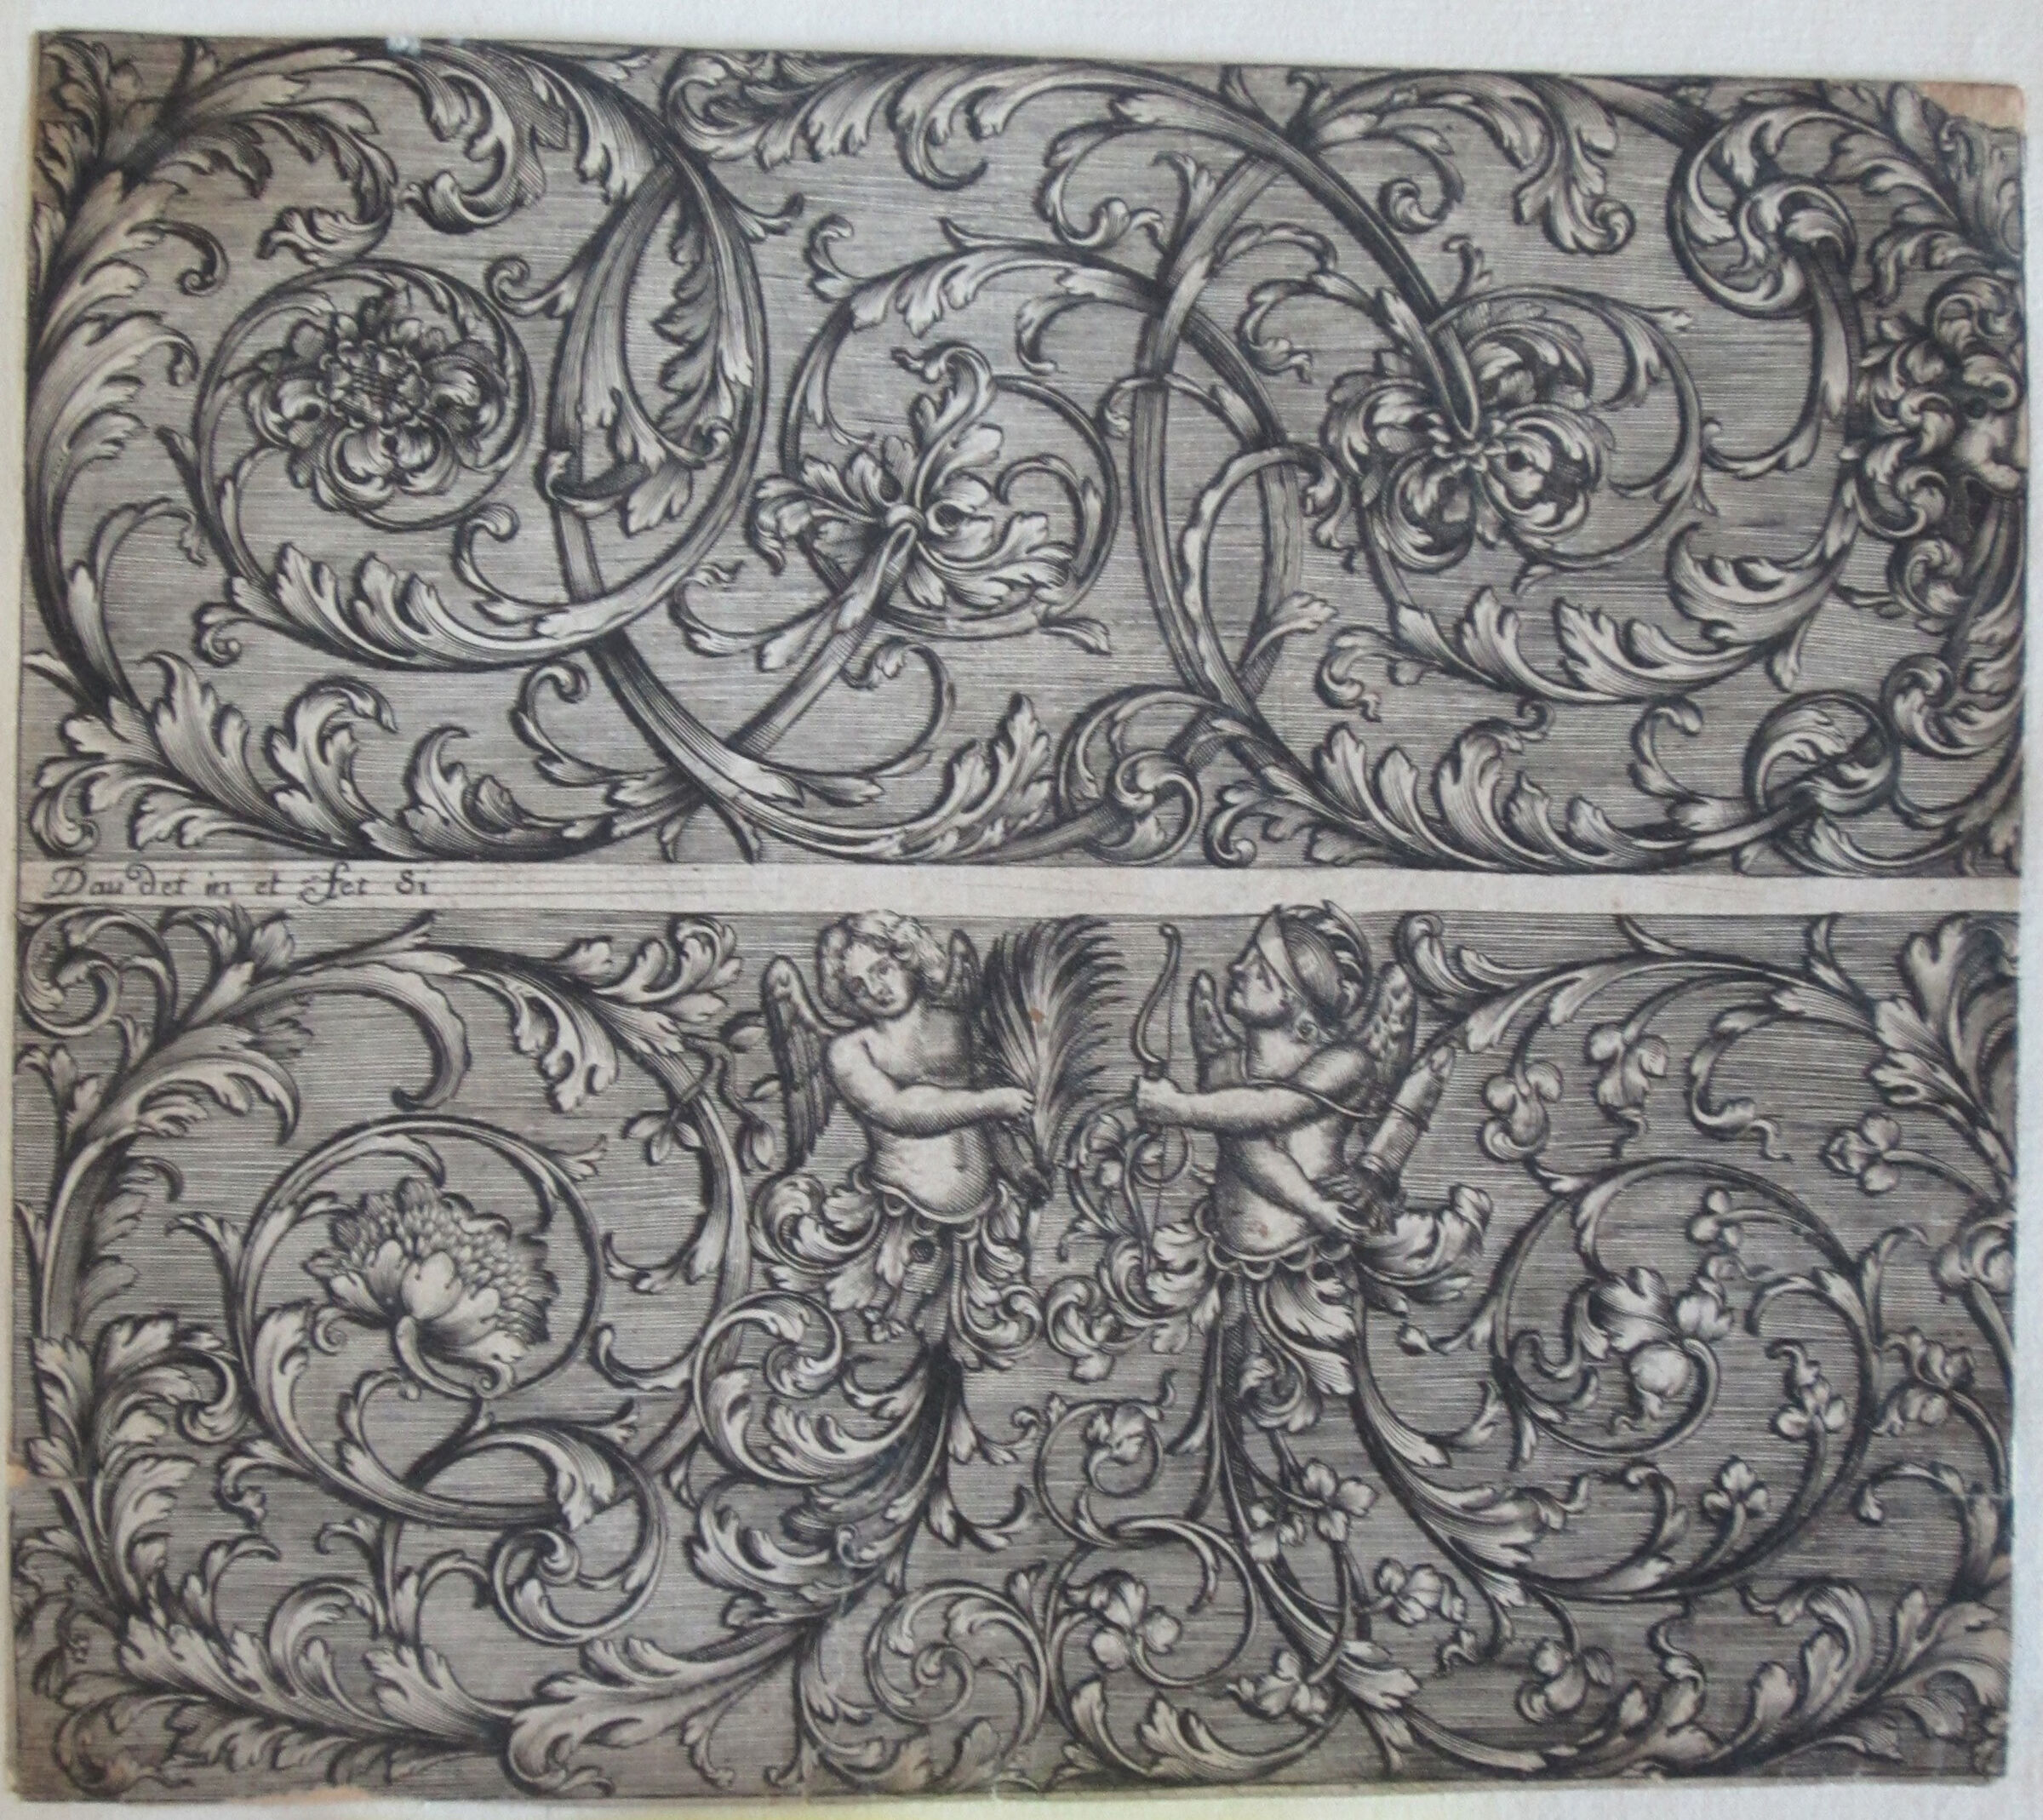 Two Foliate Moresque Friezes, The Lower One With An Archer Preparing To Shoot A Female Defending Herself With A Palm Frond